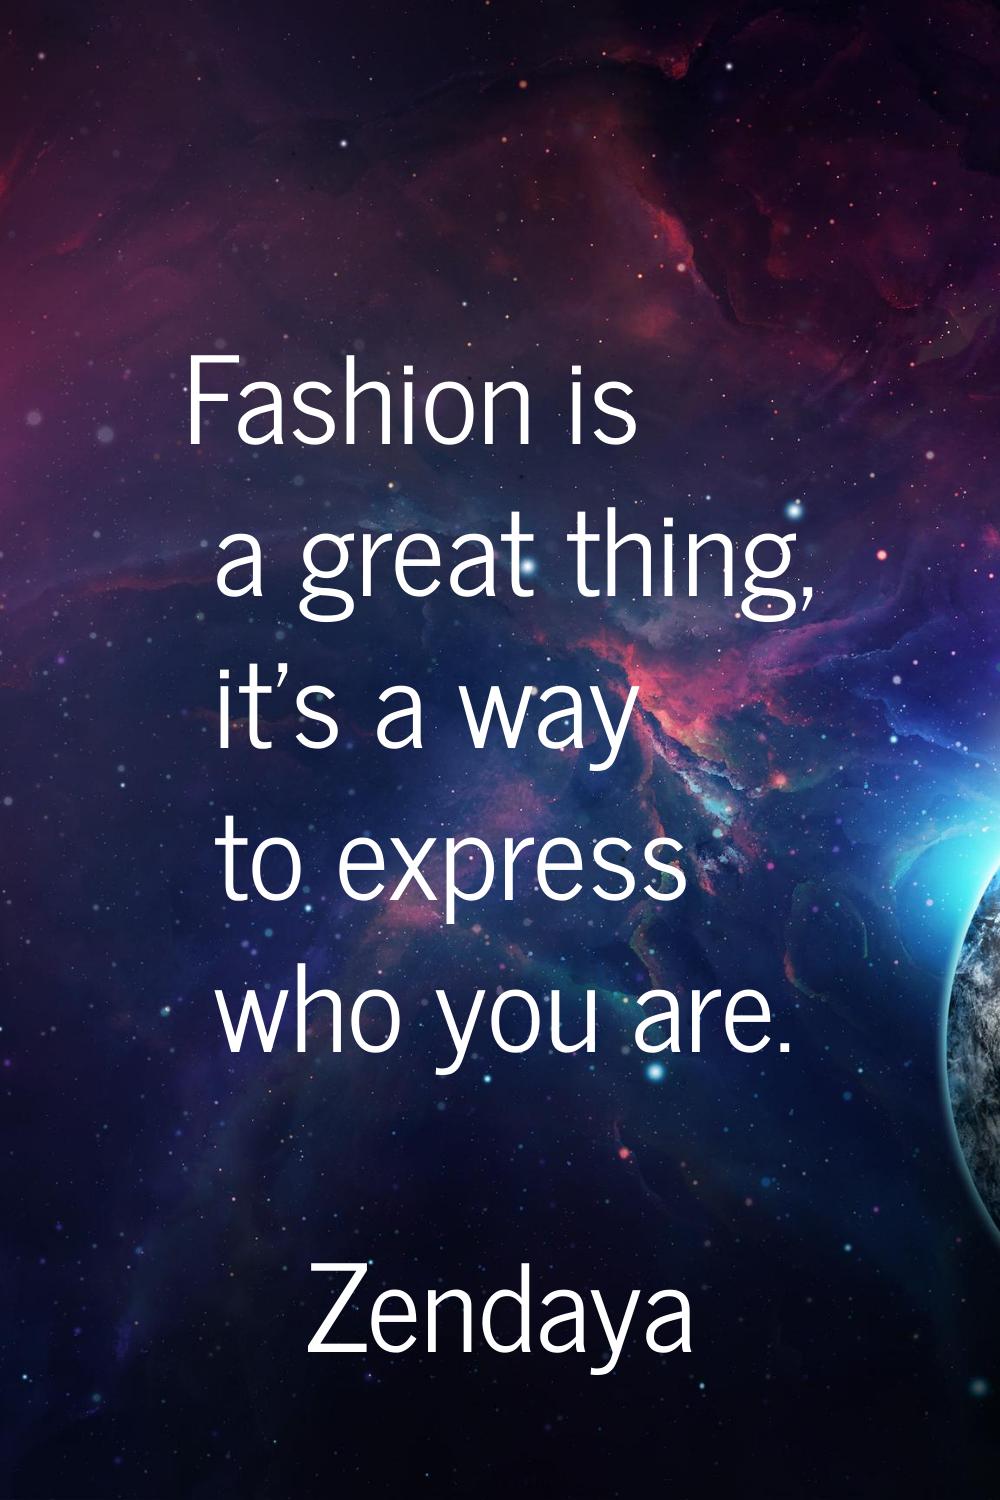 Fashion is a great thing, it's a way to express who you are.